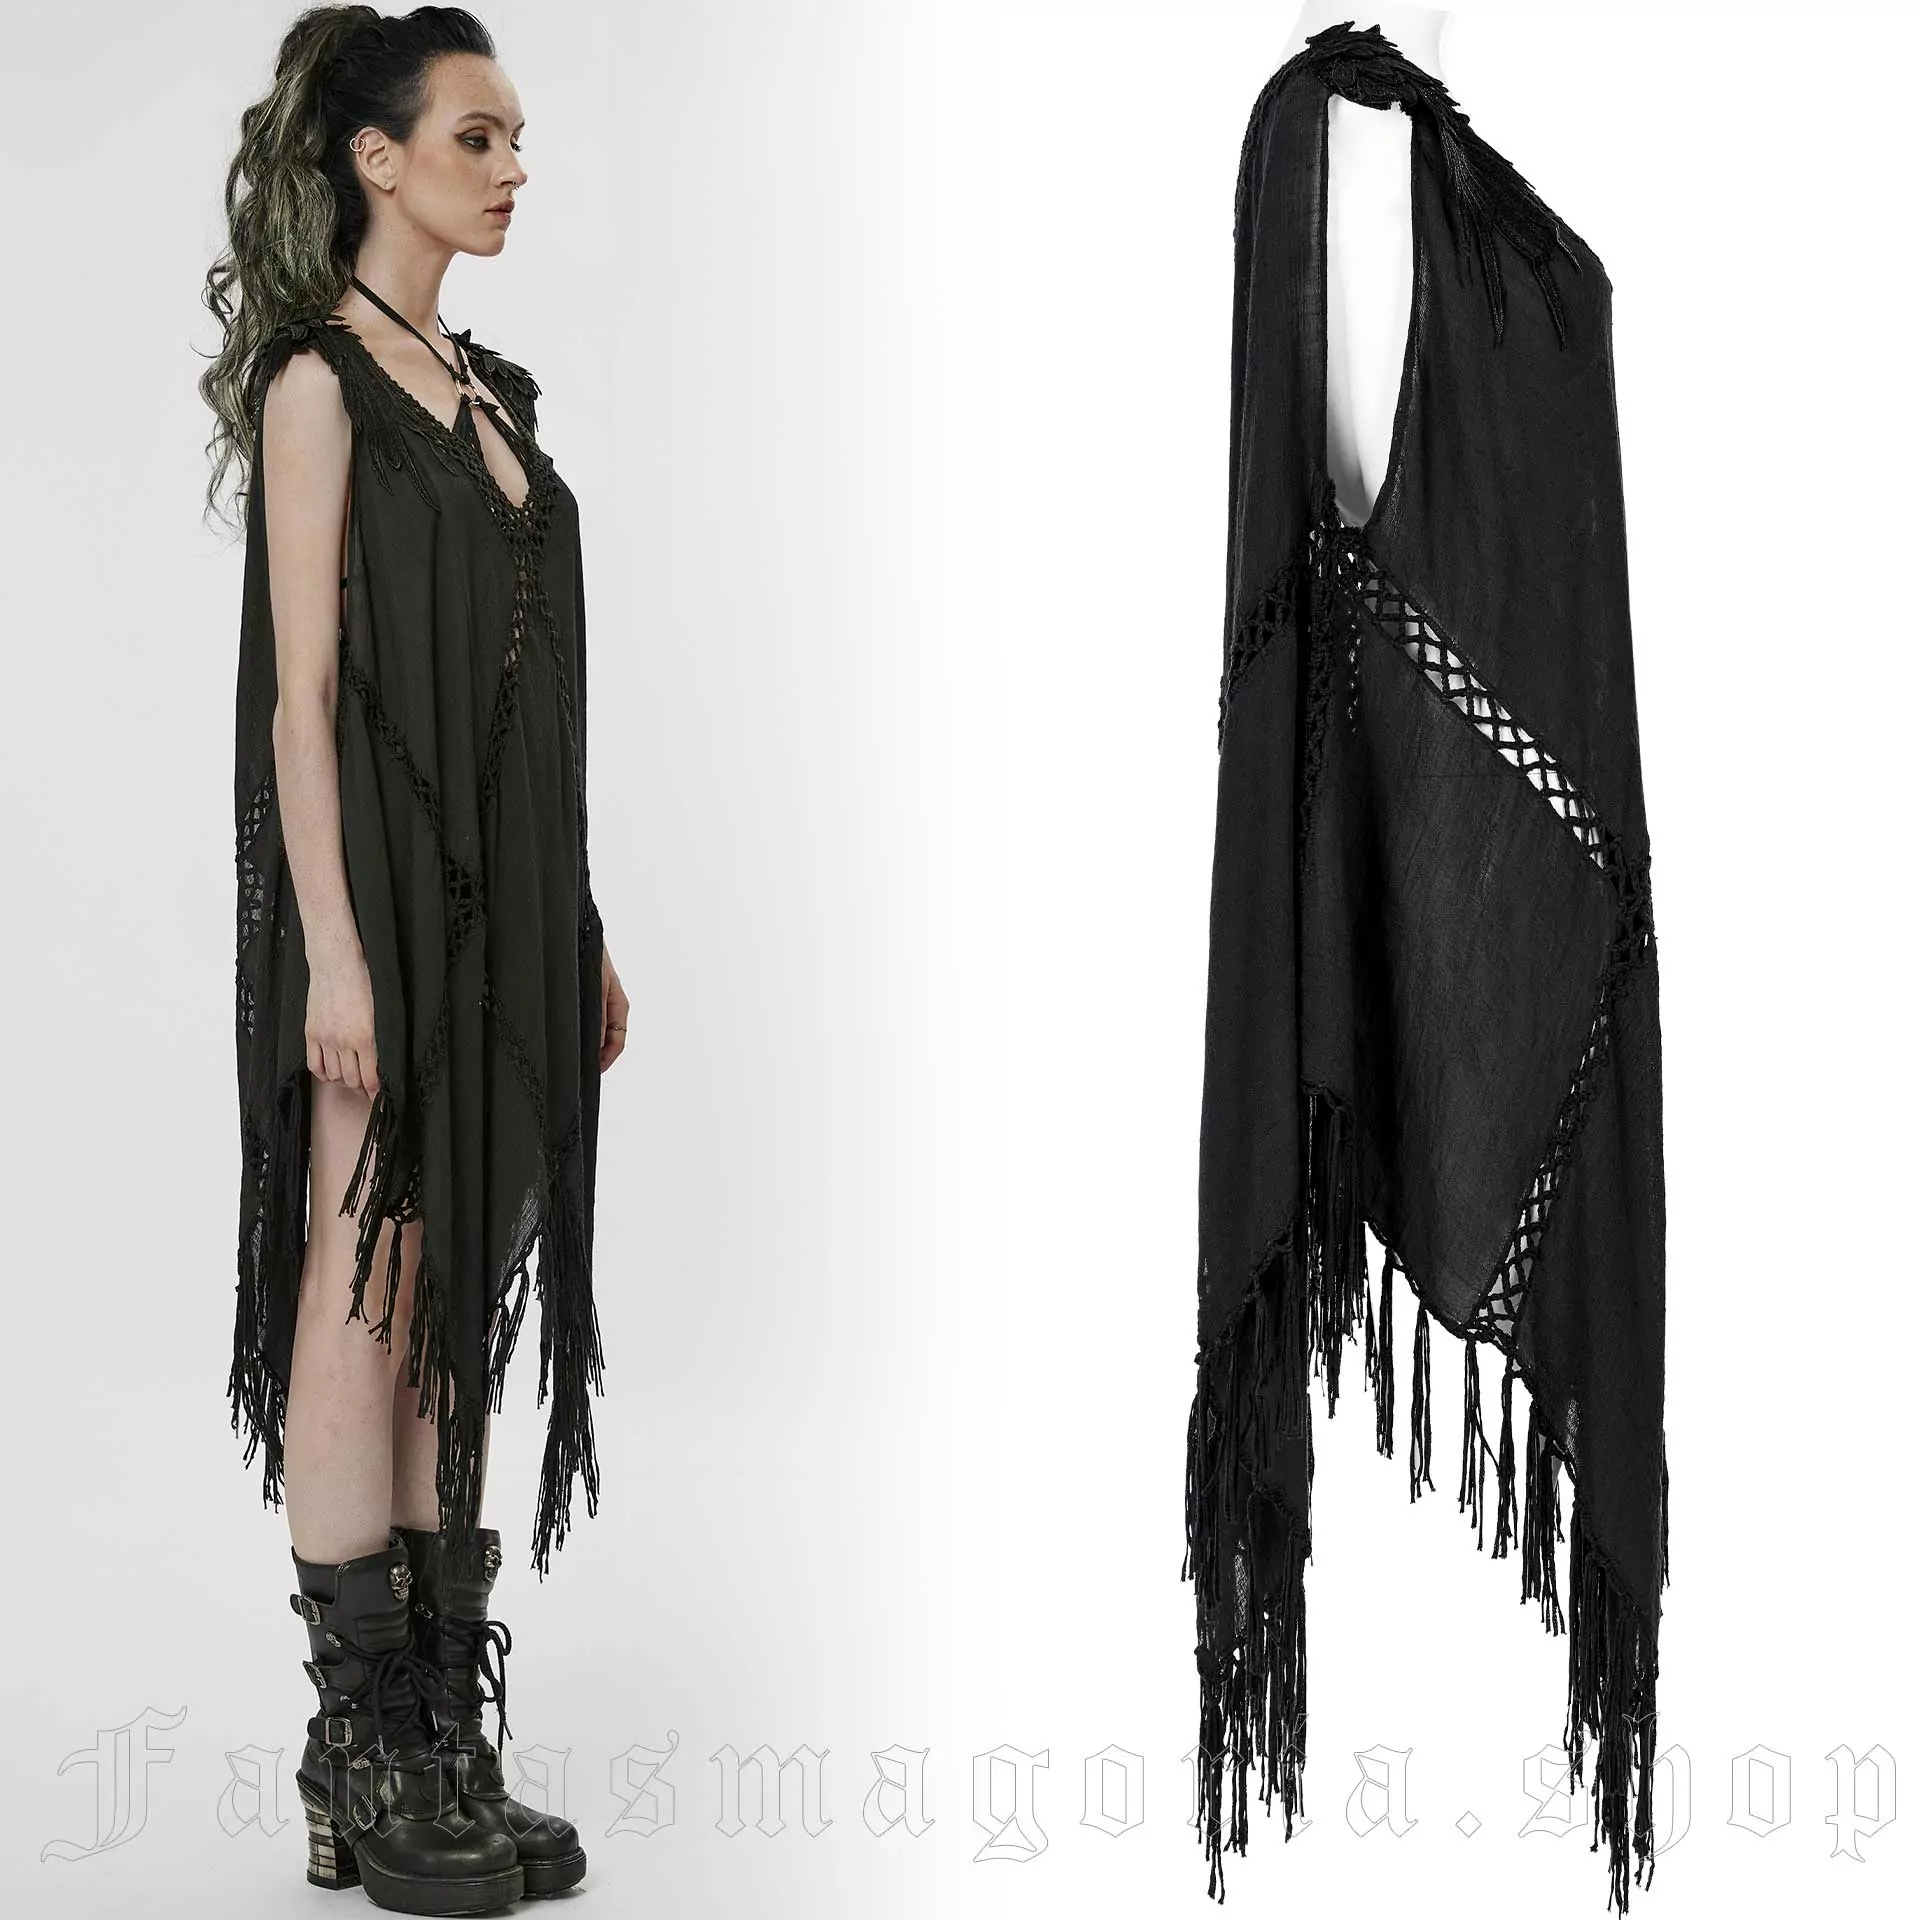 Witchy Gothic Lace Crochet Halter Top Goth Festival Crochet Crop Top -   Canada